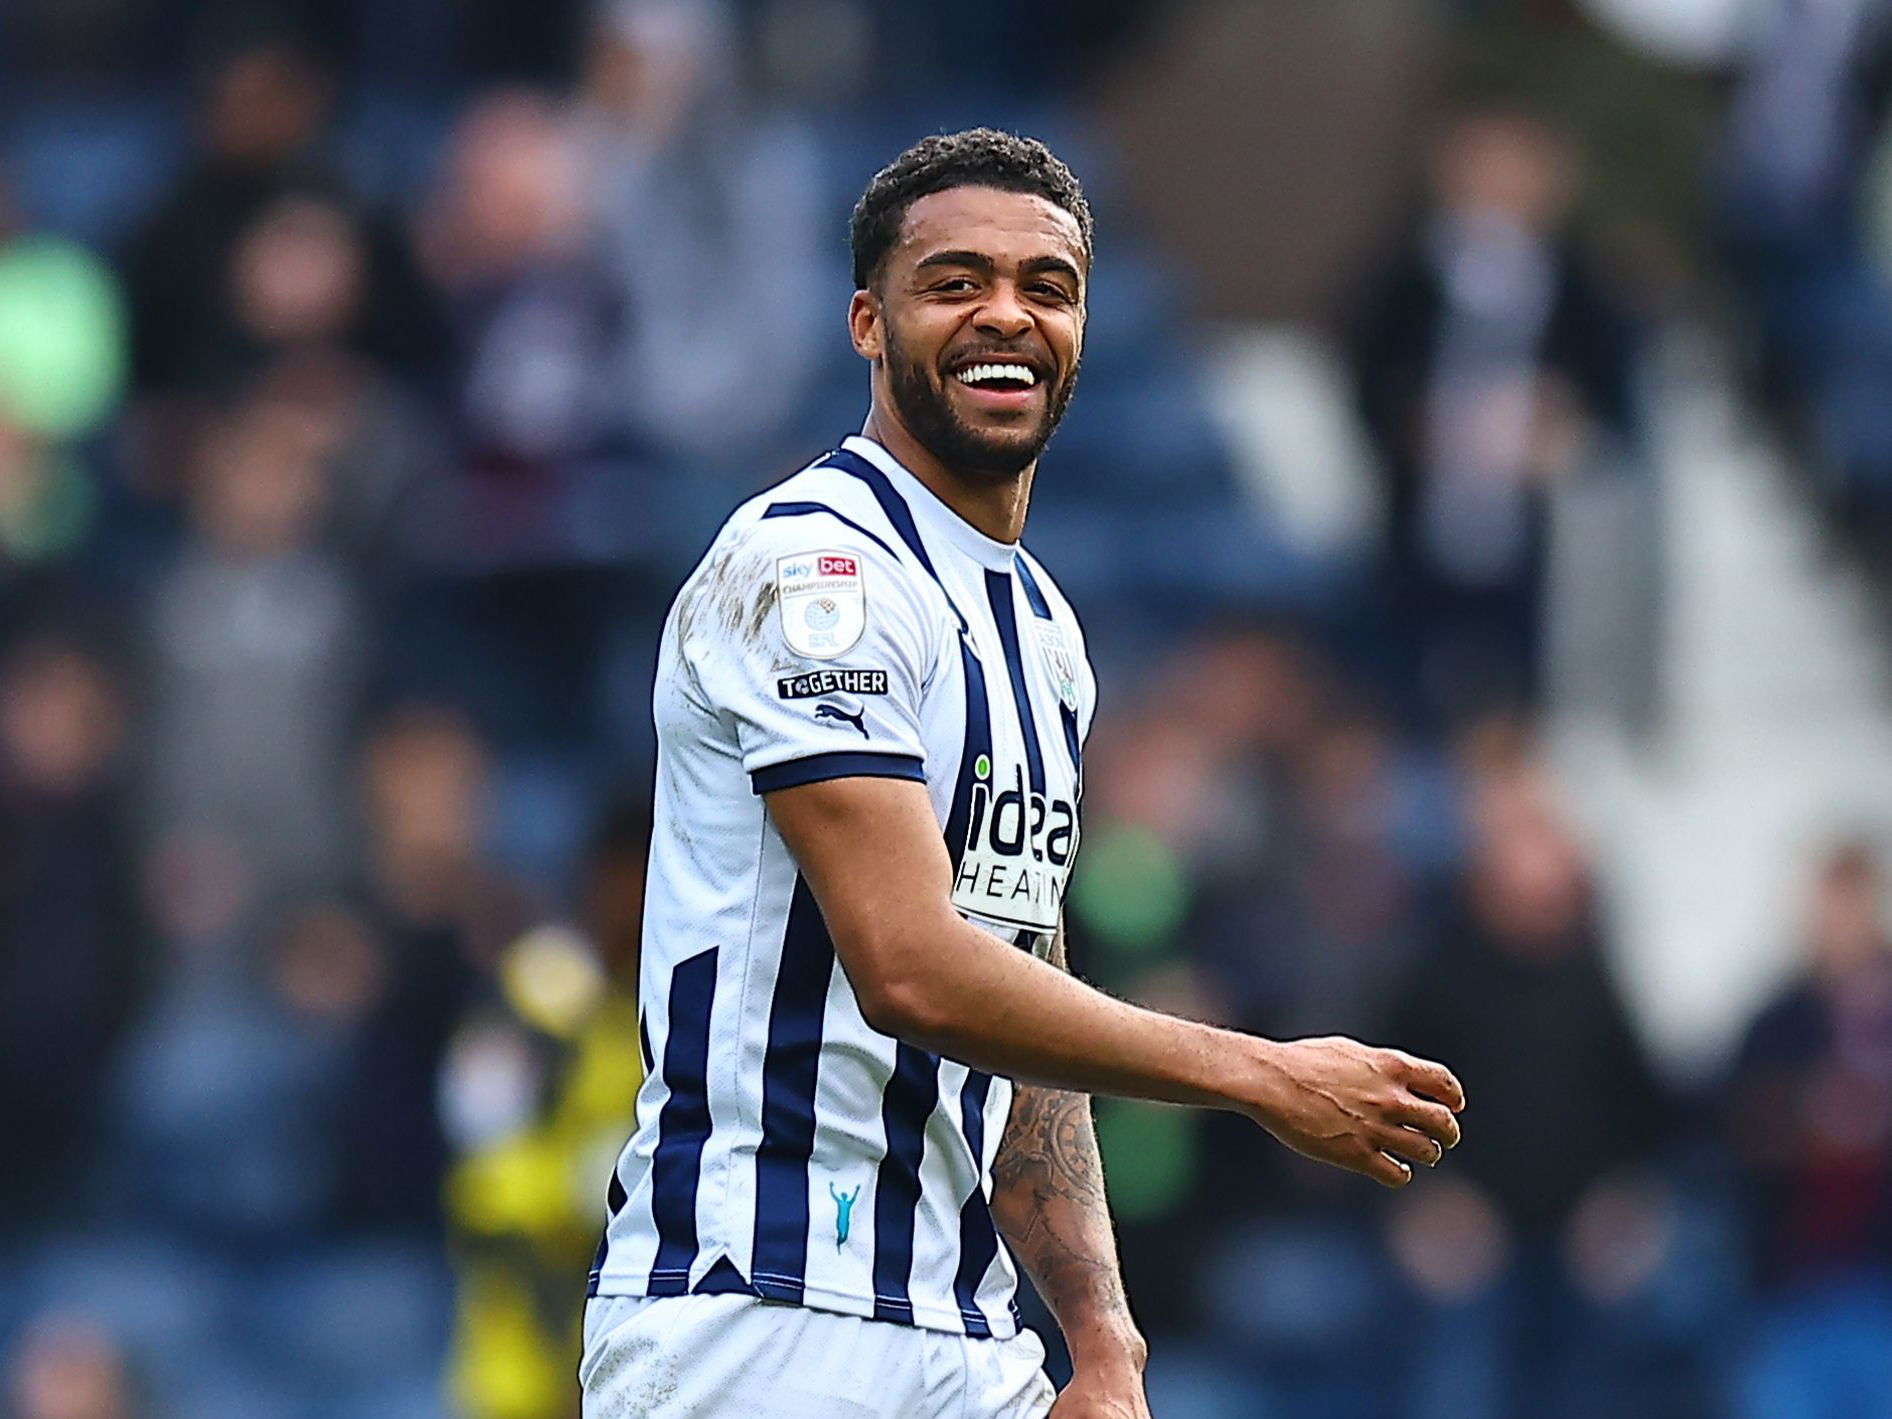 Darnell Furlong smiling after scoring against Watford at The Hawthorns